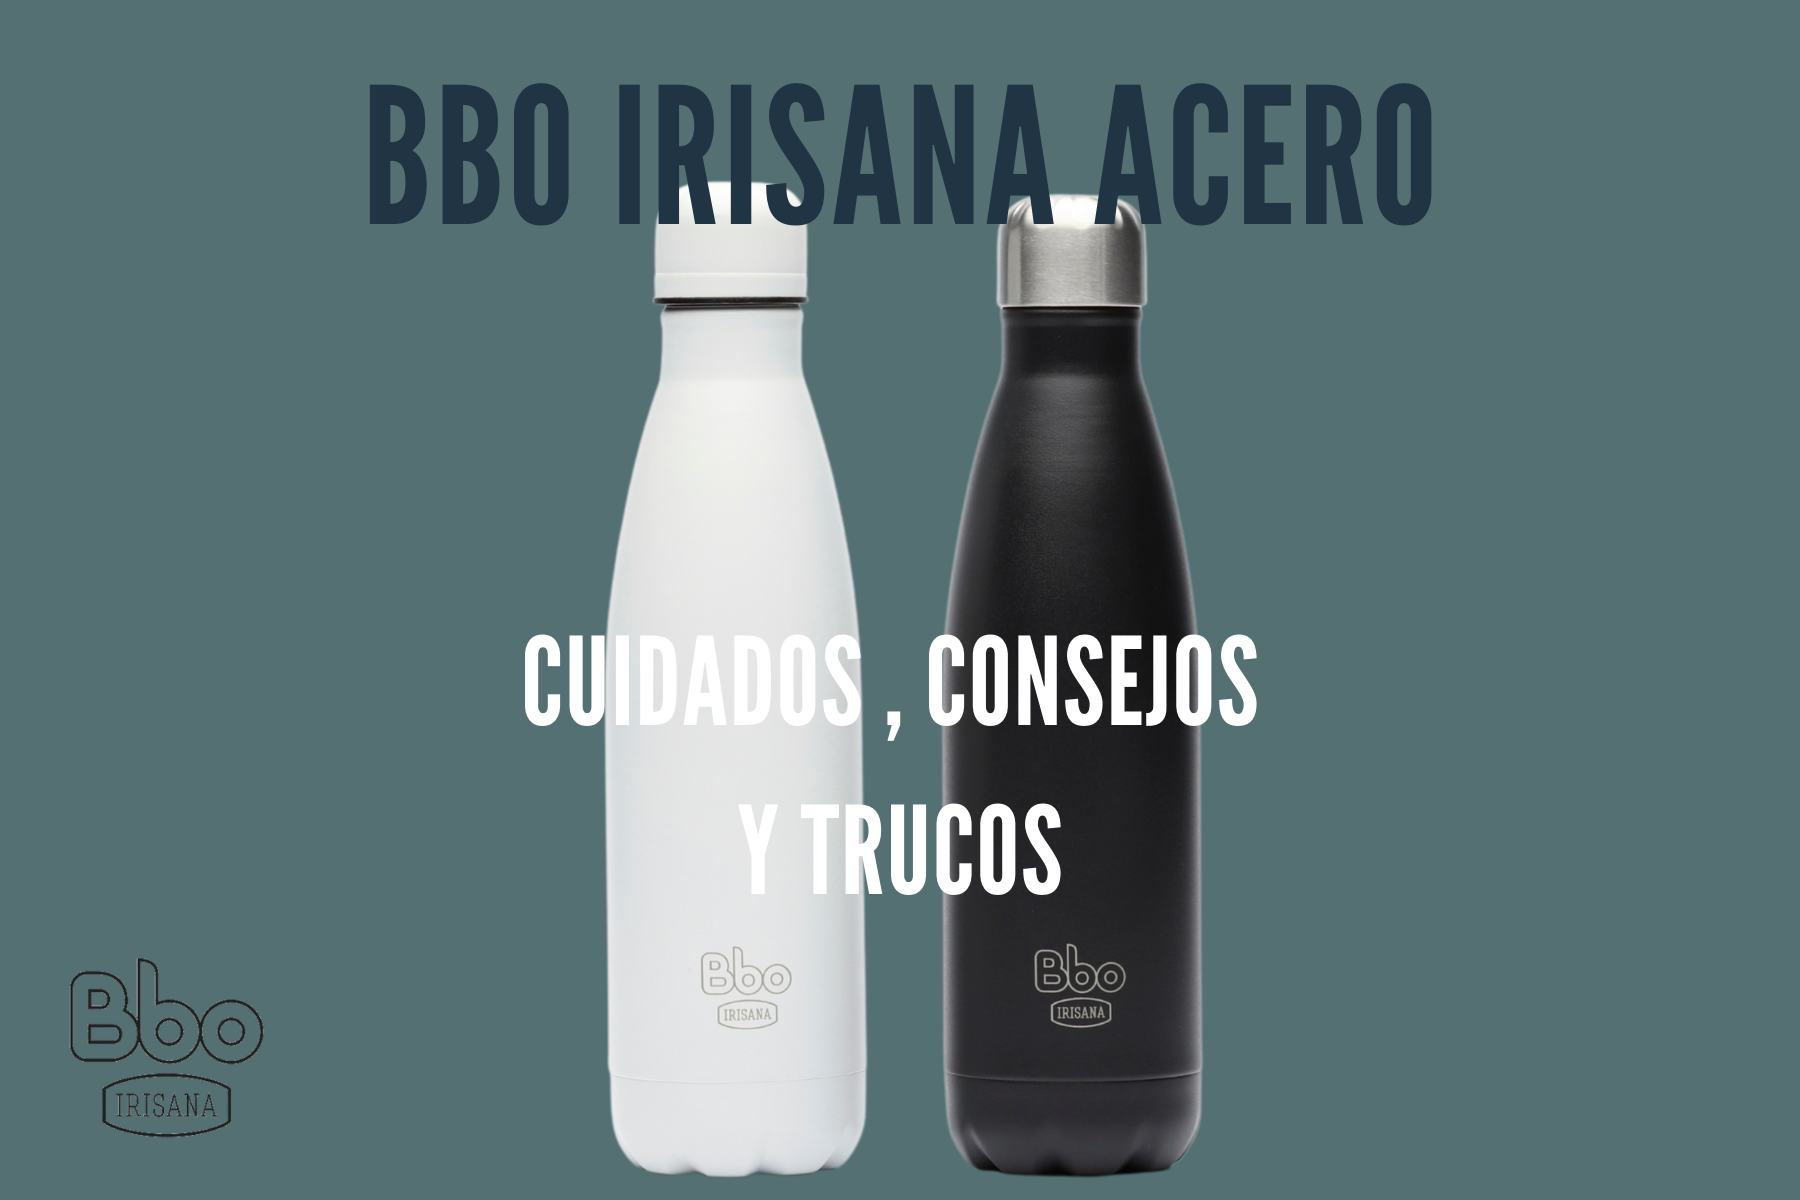 Advice, care and some tricks for your double-layer stainless steel Bbo Irisana bottle.